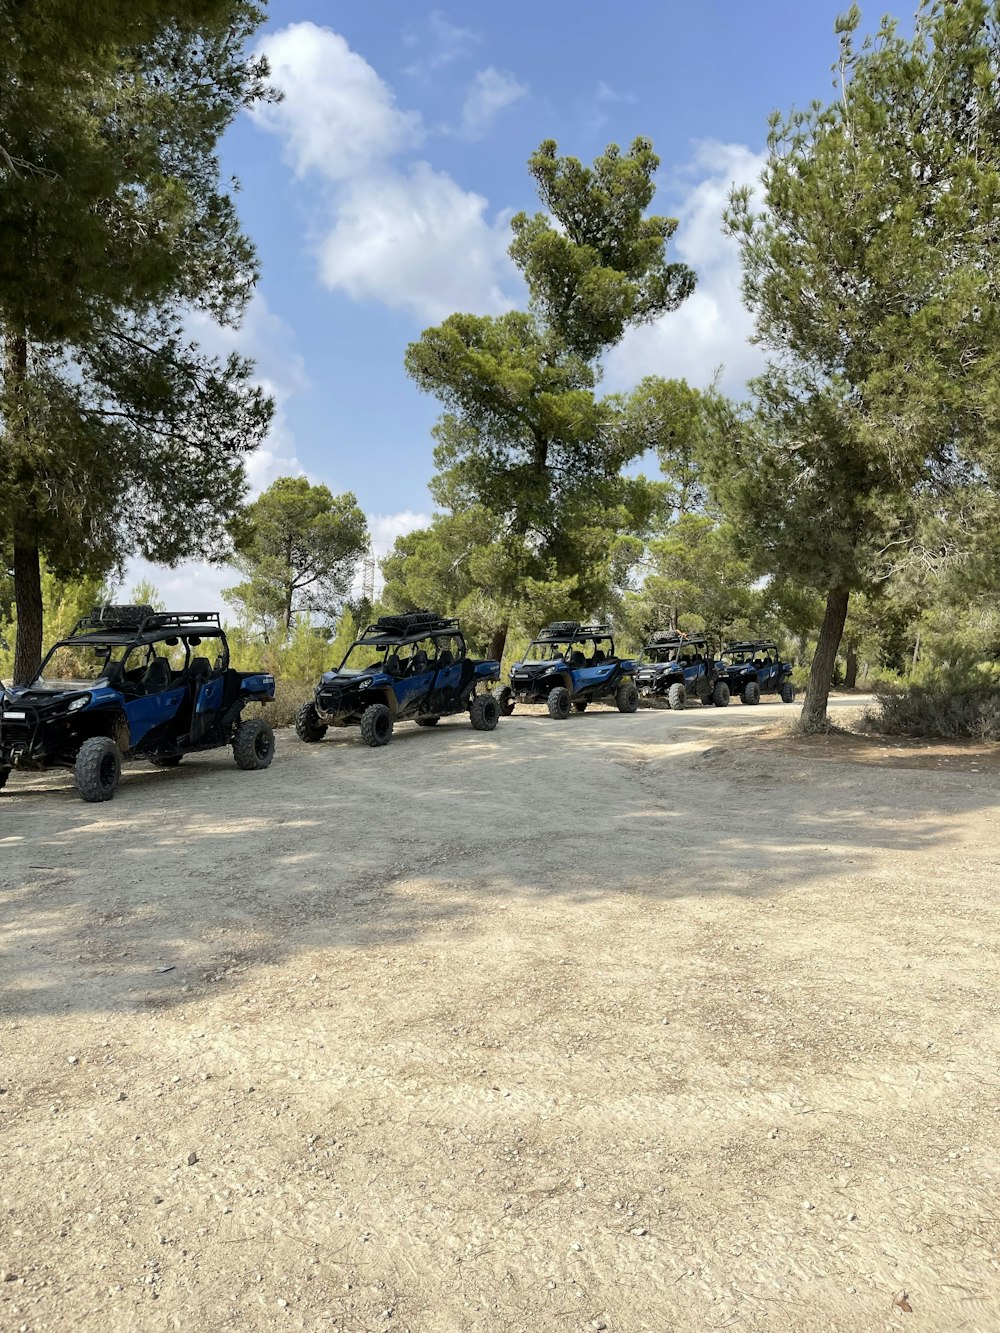 a group of four blue utensils parked on a dirt road